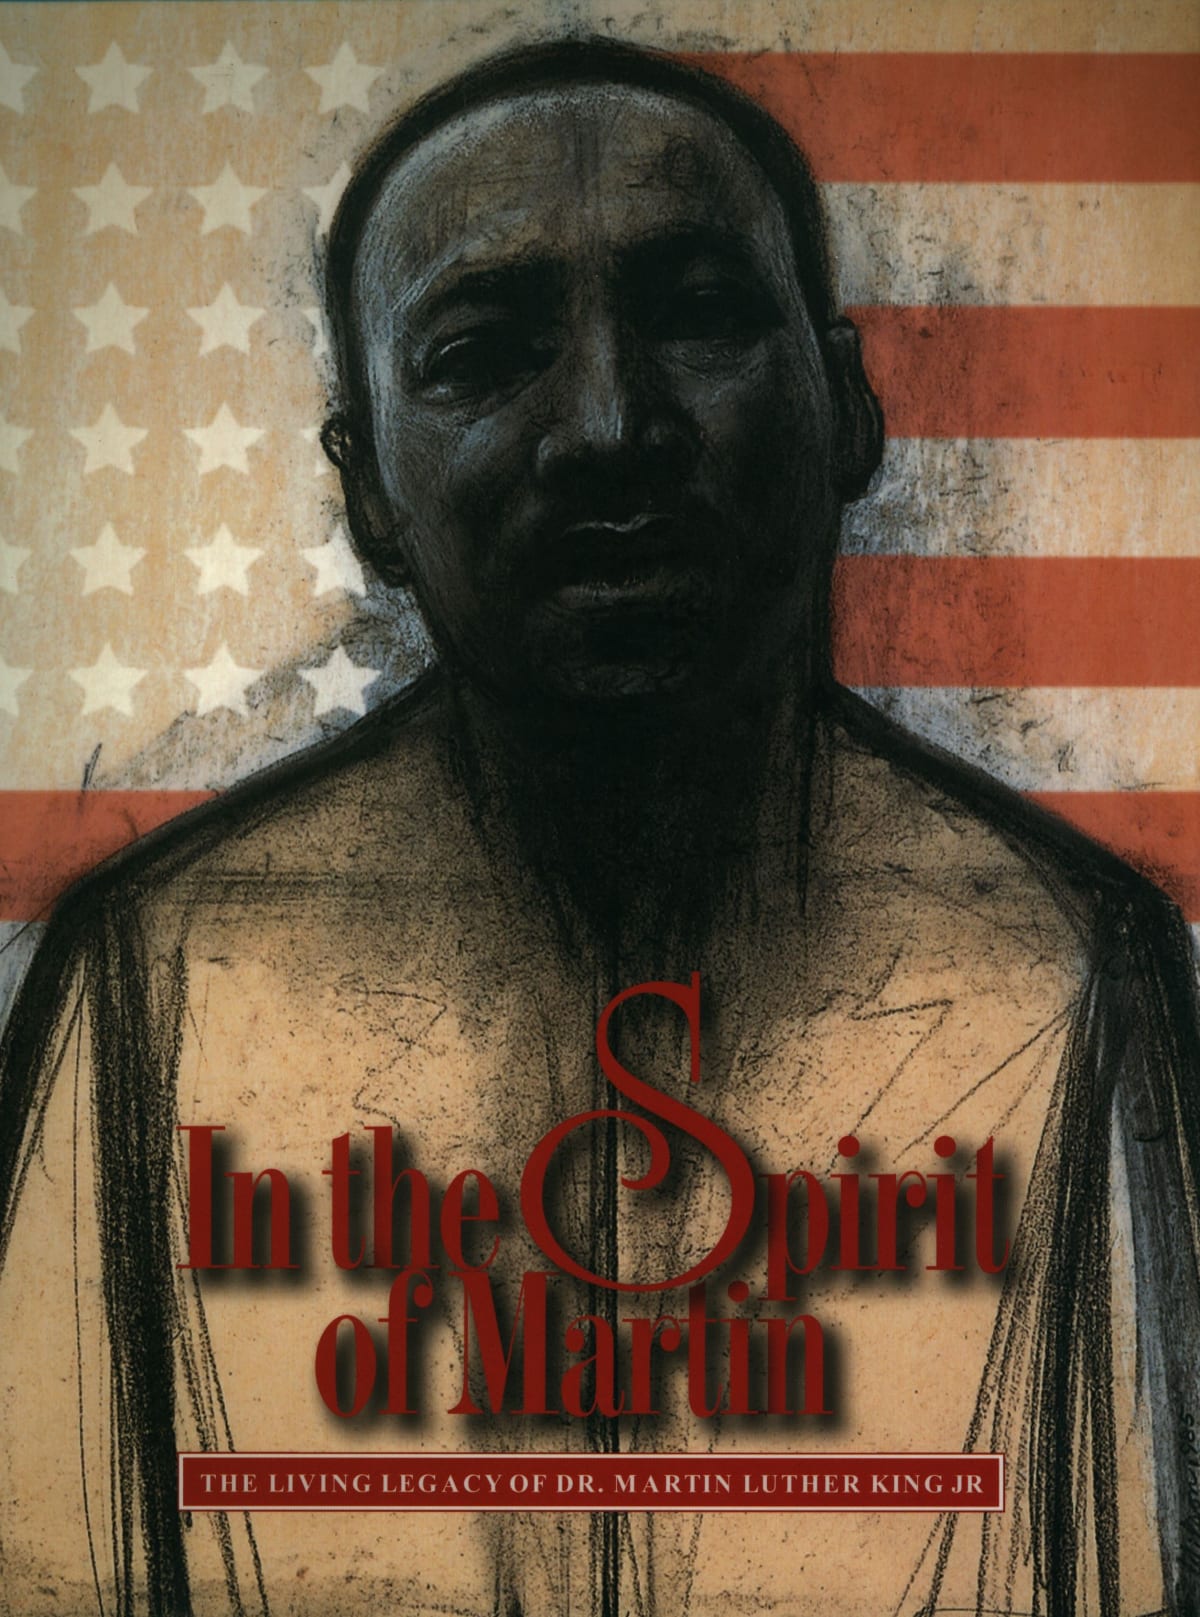 In the Spirit of Martin: The Living Legacy of Dr. Martin Luther King, Jr.